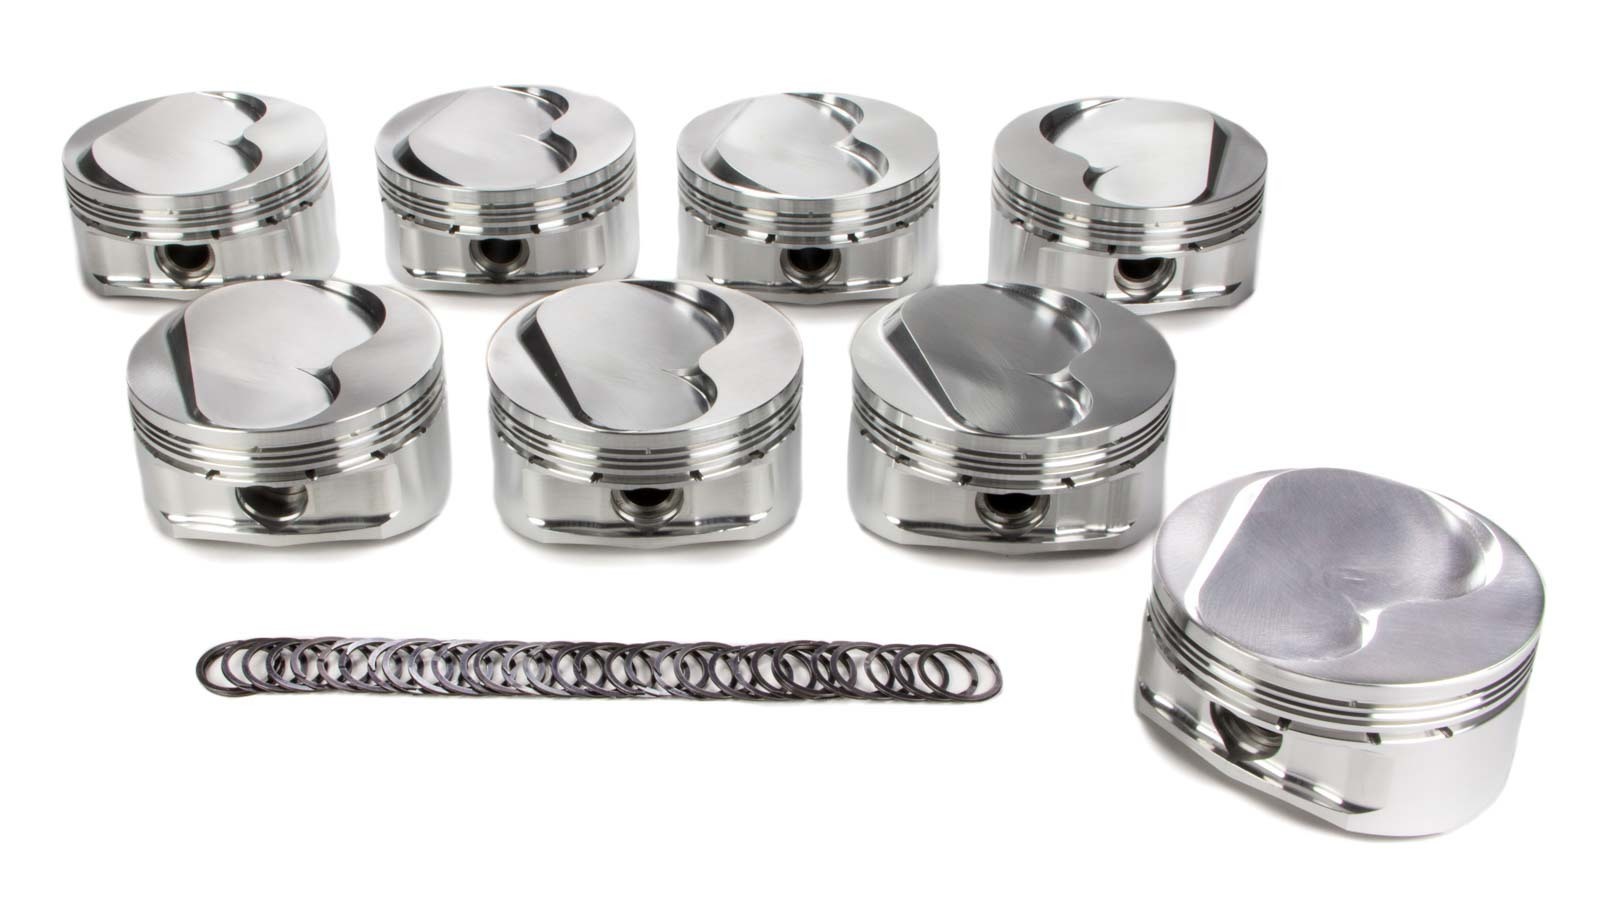 JE Pistons 281800 Piston, Small Block Open Chamber Dome, Forged, 4.140 in Bore, 1.2 x 1.5 x 3.0 mm Ring Grooves, Minus 4.70 cc, Small Block Chevy, Set of 8